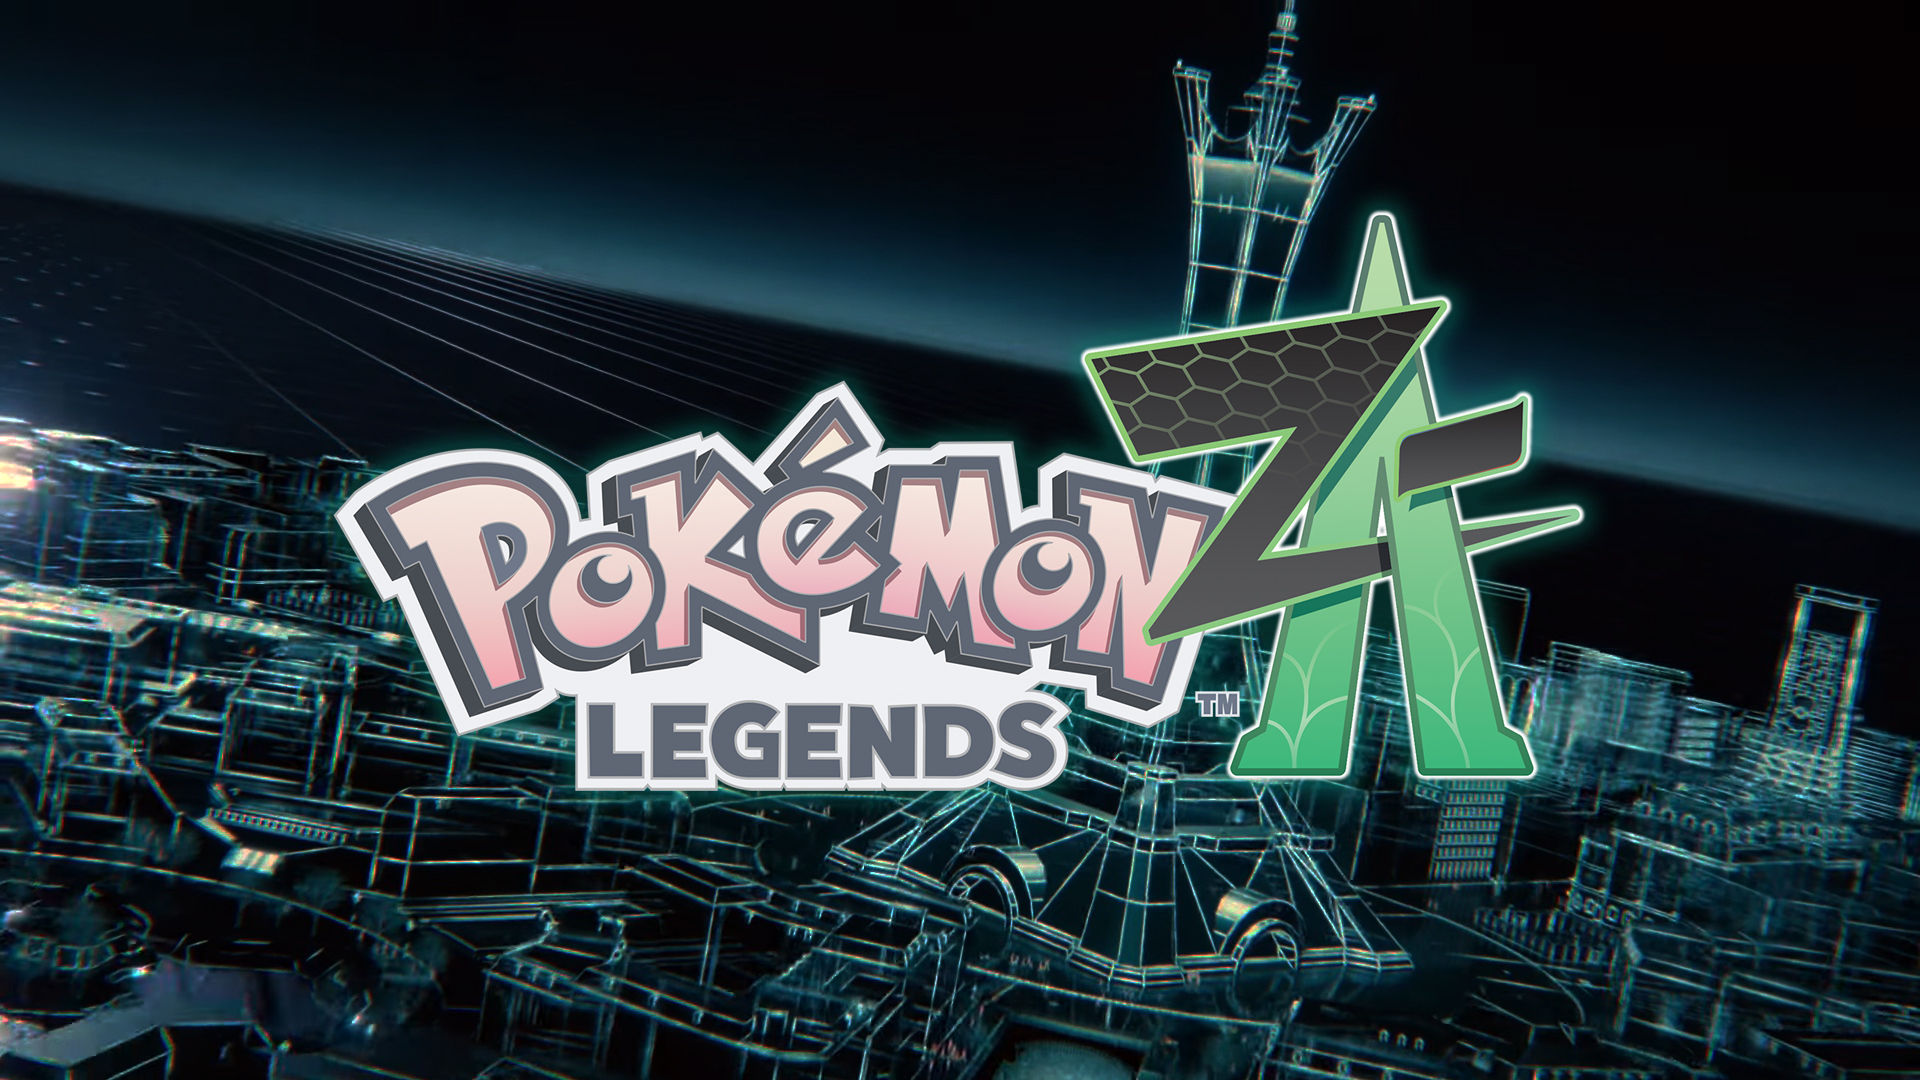 The logo for Pokémon Legends Z-A overlayed on a neon-lit outline of Lumiose City